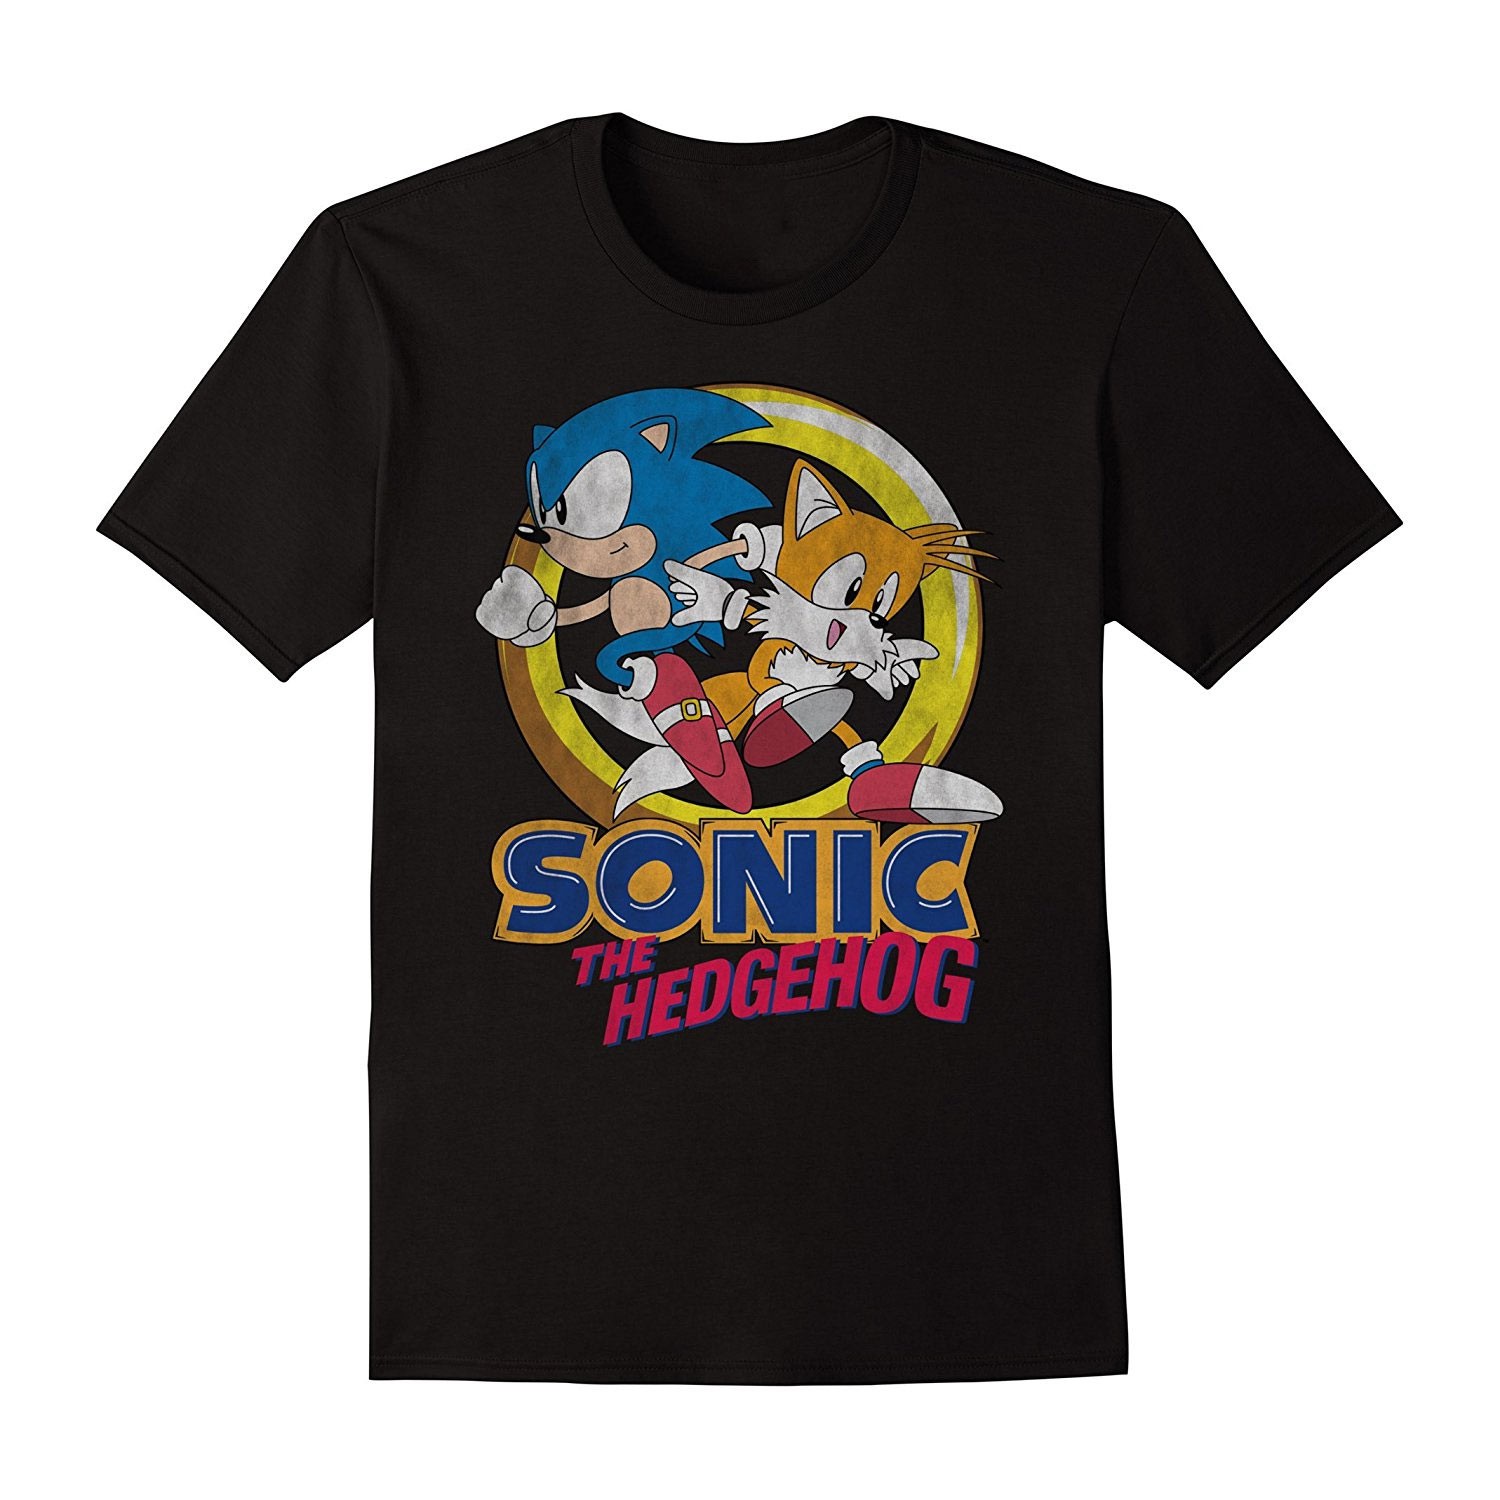 Sonic The Hedgehog And Tails Boys 8-20 Youth Black Tee Shirt